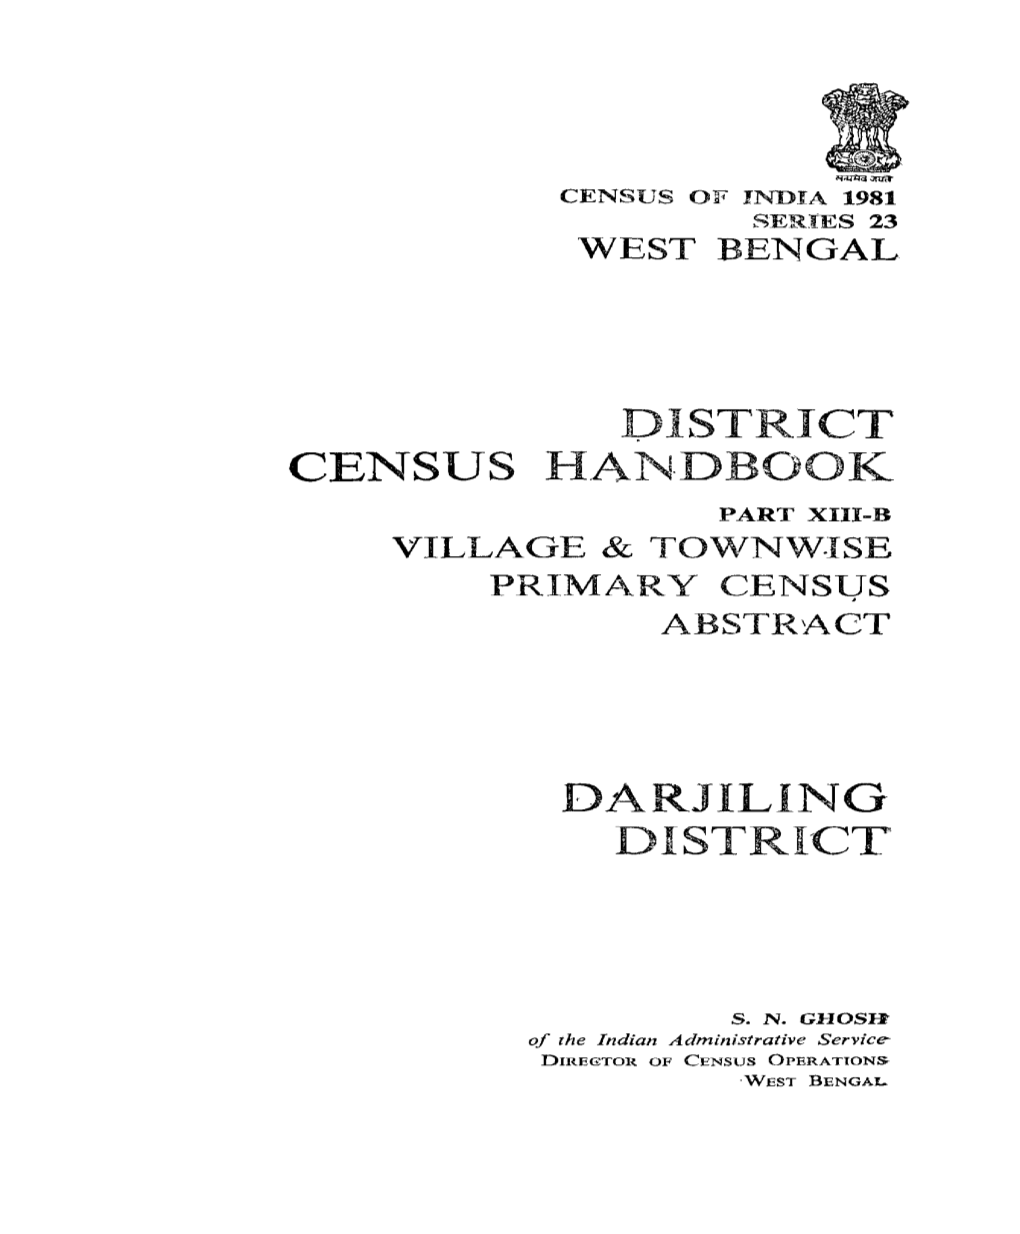 Village & Townise Primary Census Abstract, Darjiling, Part XIII-B, Series-22, West Bengal